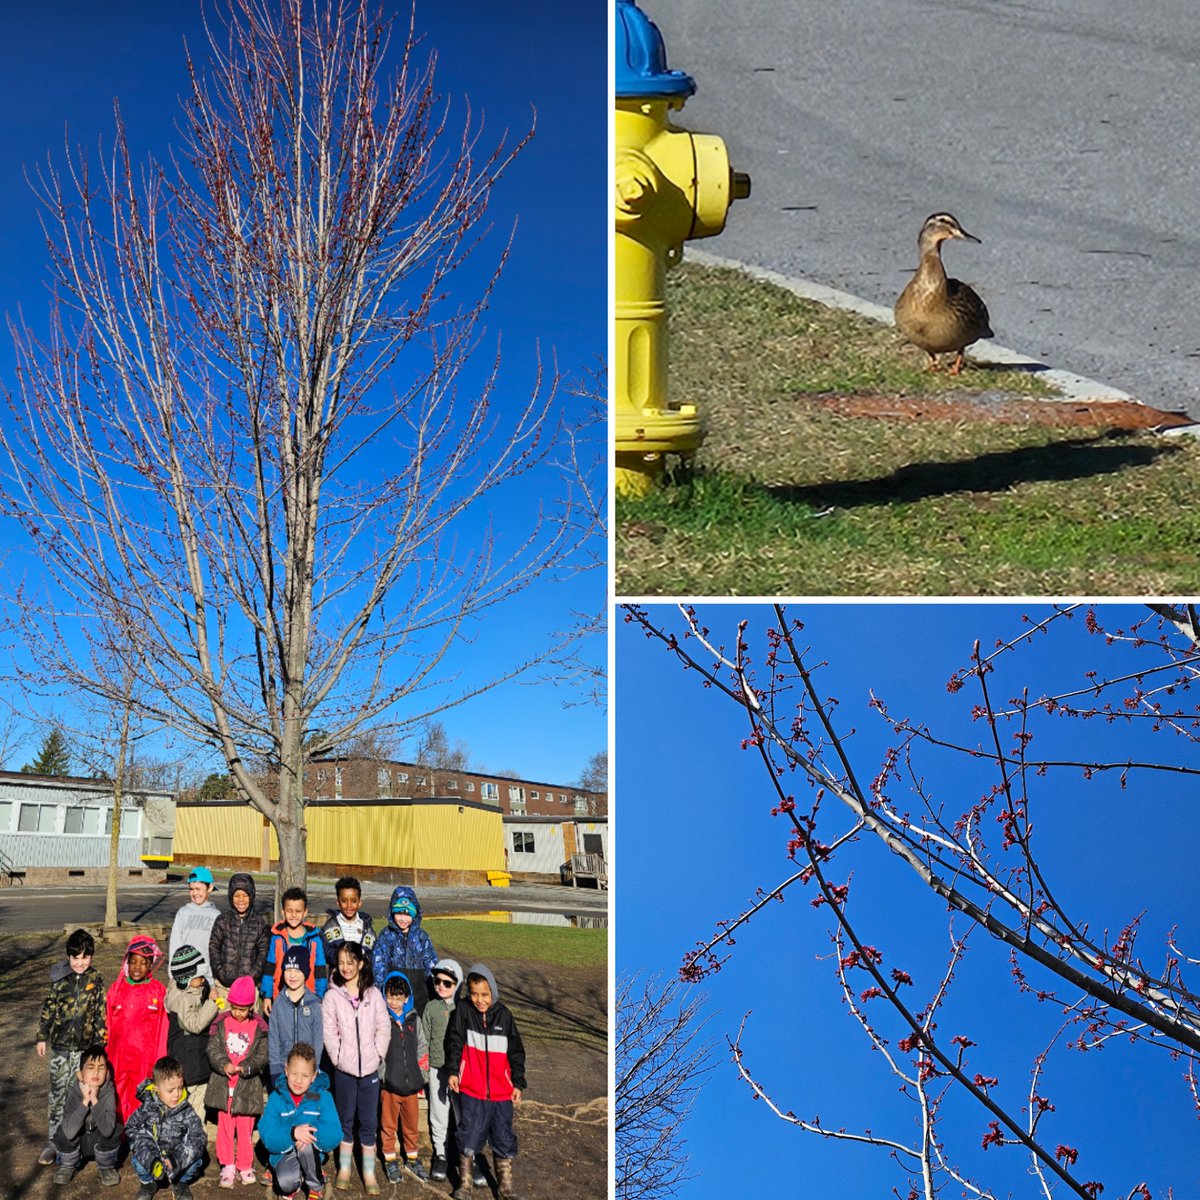 During outdoor learning this morning we went on a nature walk to spot signs of 'le printemps'. Students were excited to hear birds singing, see green grass growing, buds on our class tree, and 'un canard'! @StRitaOCSB @ocsbEco